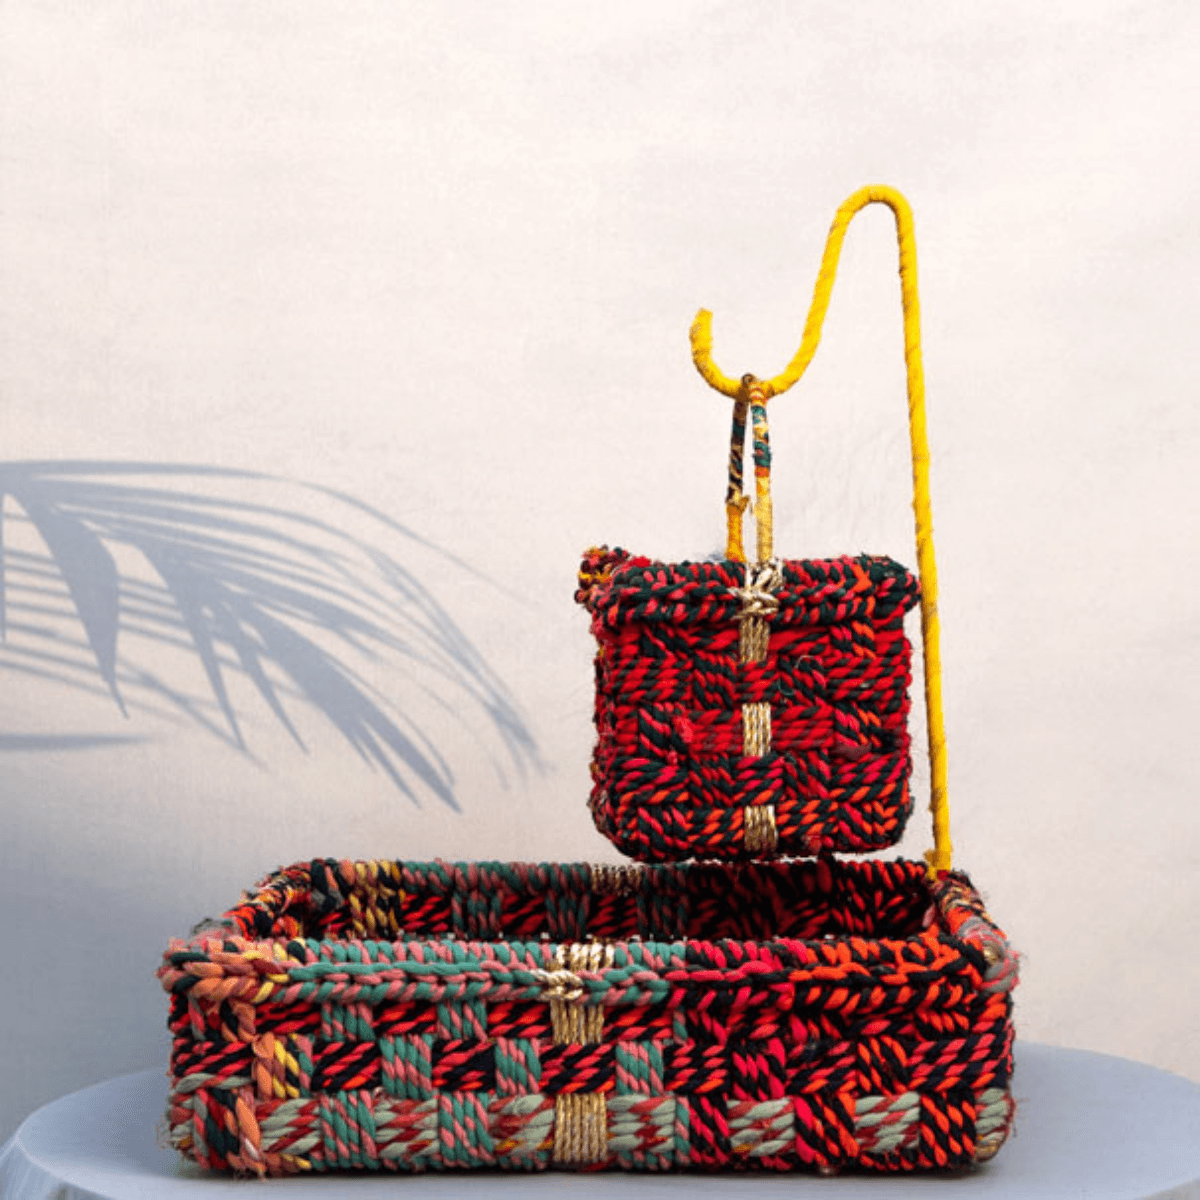 Double Decker Upcycled Textile Tray - Sirohi.org - Colour_Gold, Colour_Multi-Colour, Purpose_Home Accessory, Purpose_Organiser, Rope Material_Natural Jute Fibre, Rope Material_Plastic Waste, Rope Material_Textile Waste